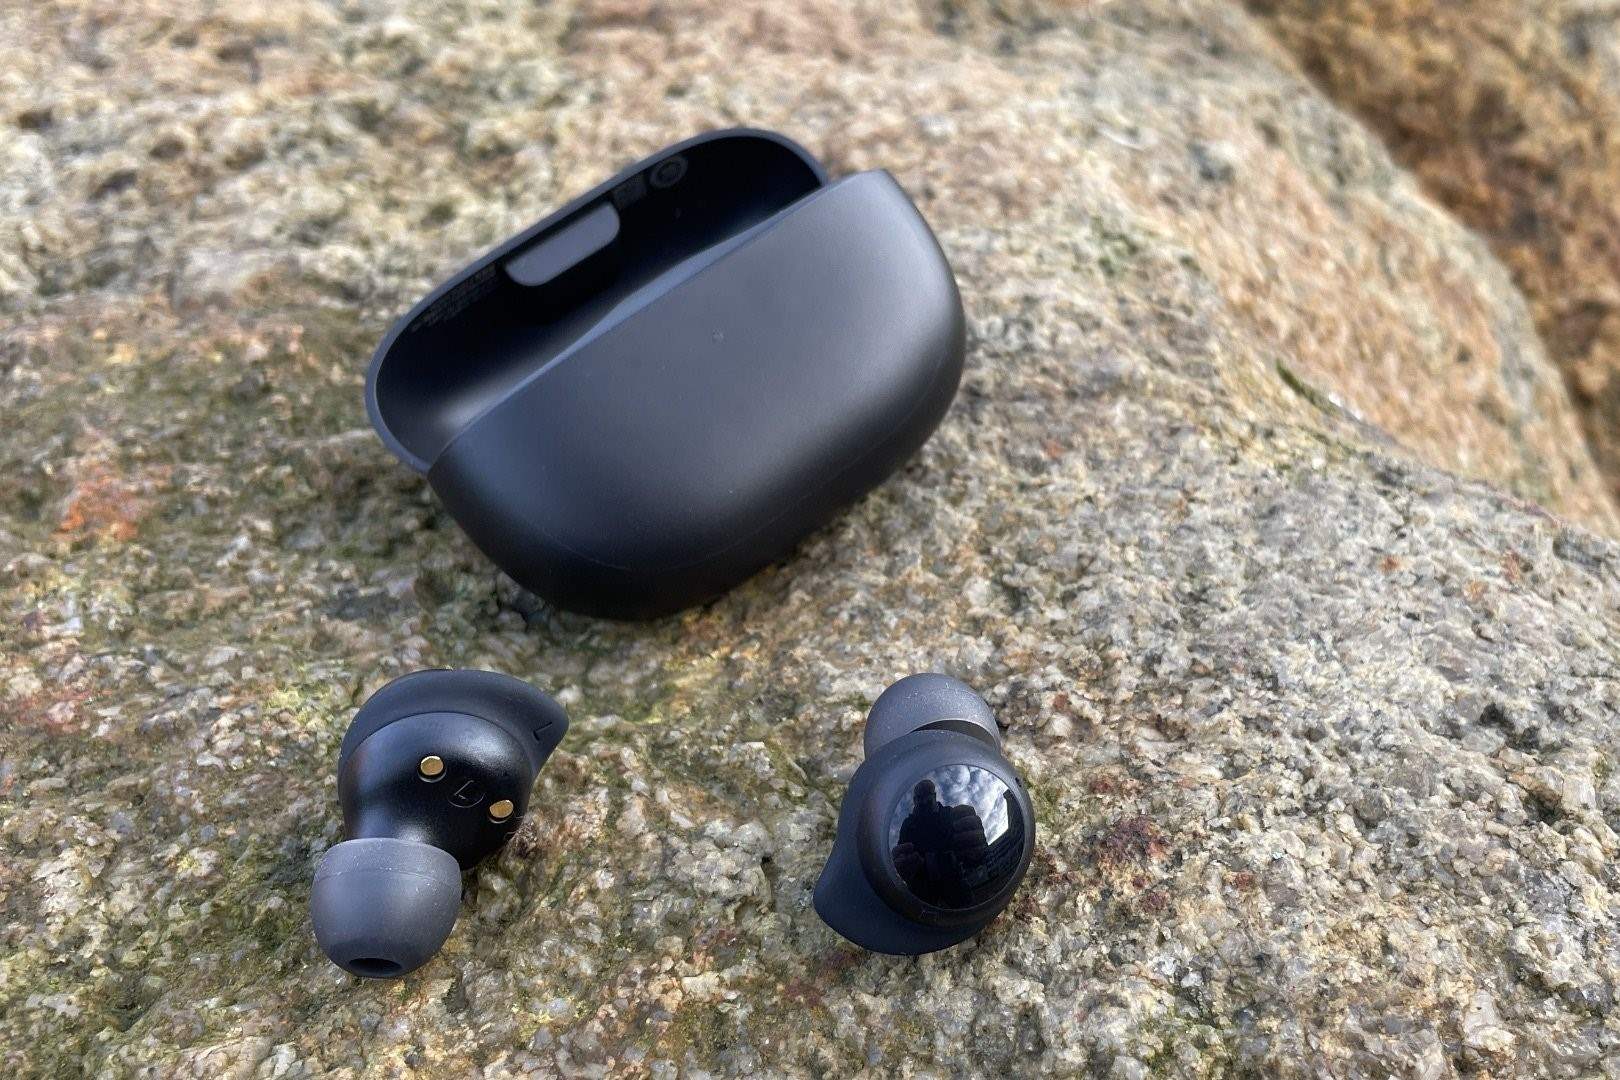 Pairing Redmi Earbuds: A Step-by-Step Guide